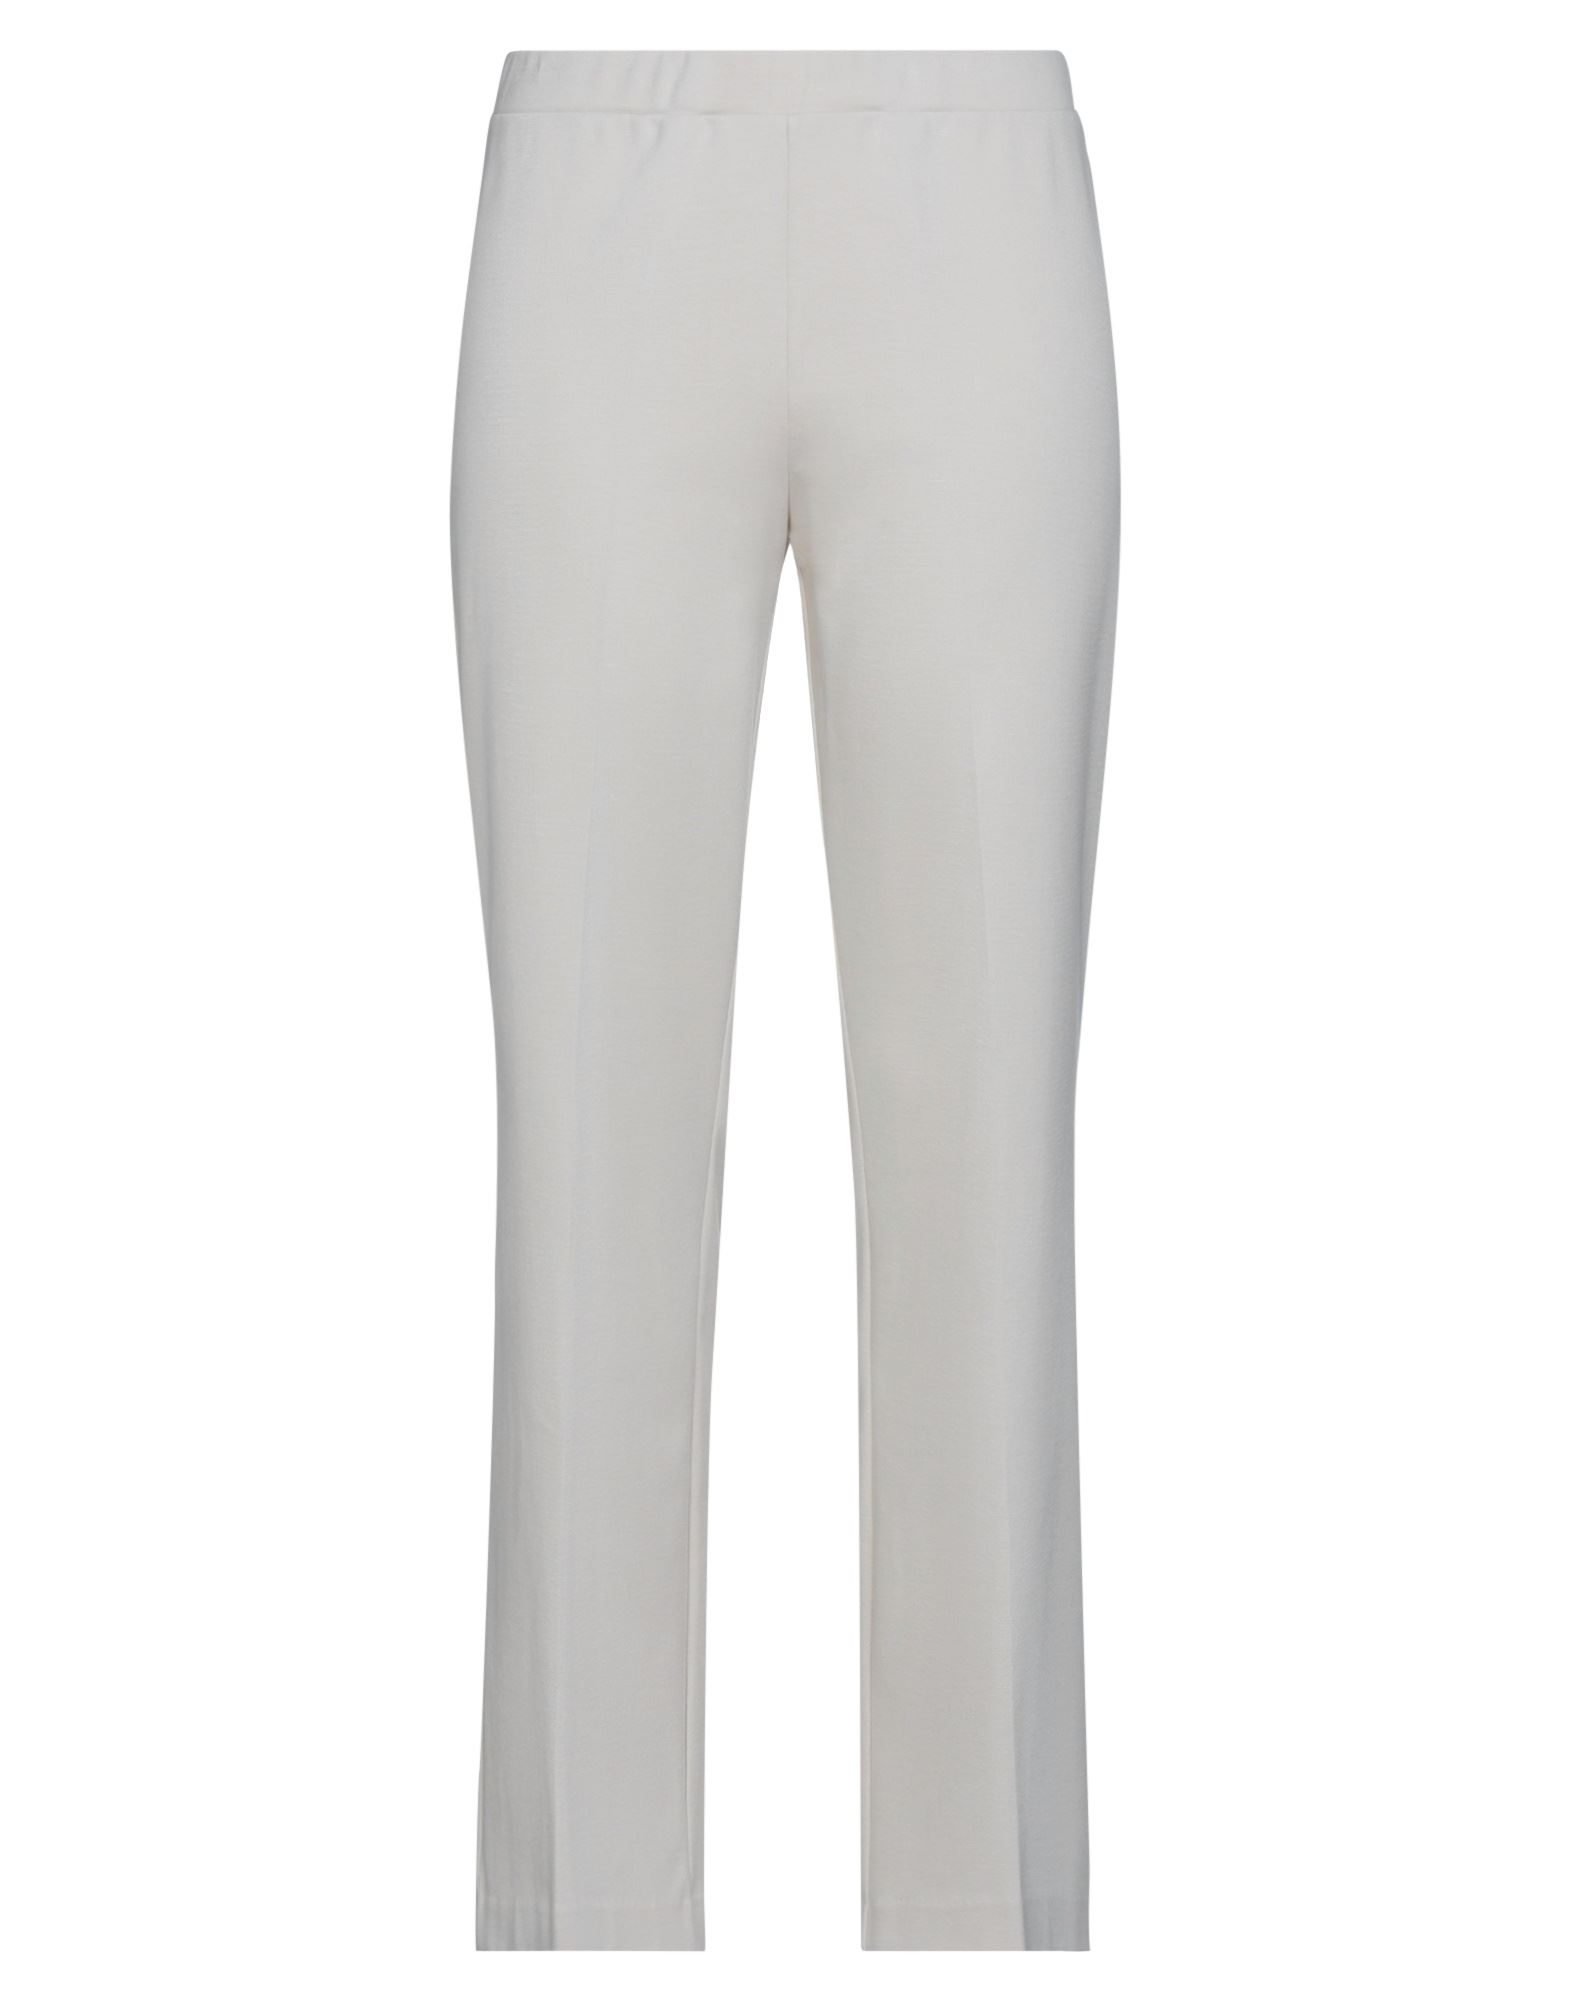 1-one Pants In Ivory